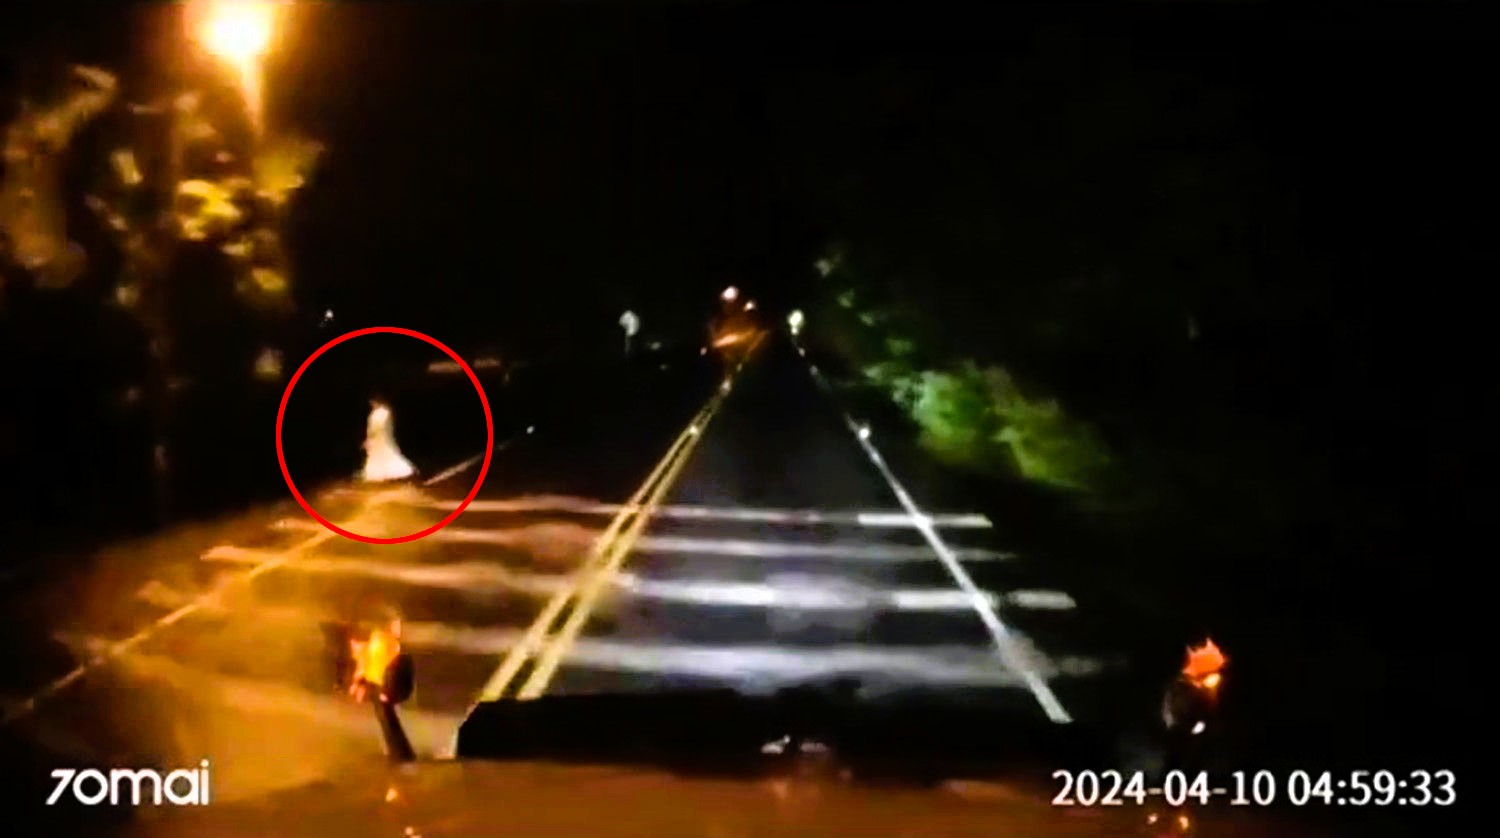 A dashcam captures a spine-chilling moment as a "ghost" crosses a road in Colombia. Social media erupts with debates over the eerie sighting, with some convinced of the paranormal and others offering mundane explanations.